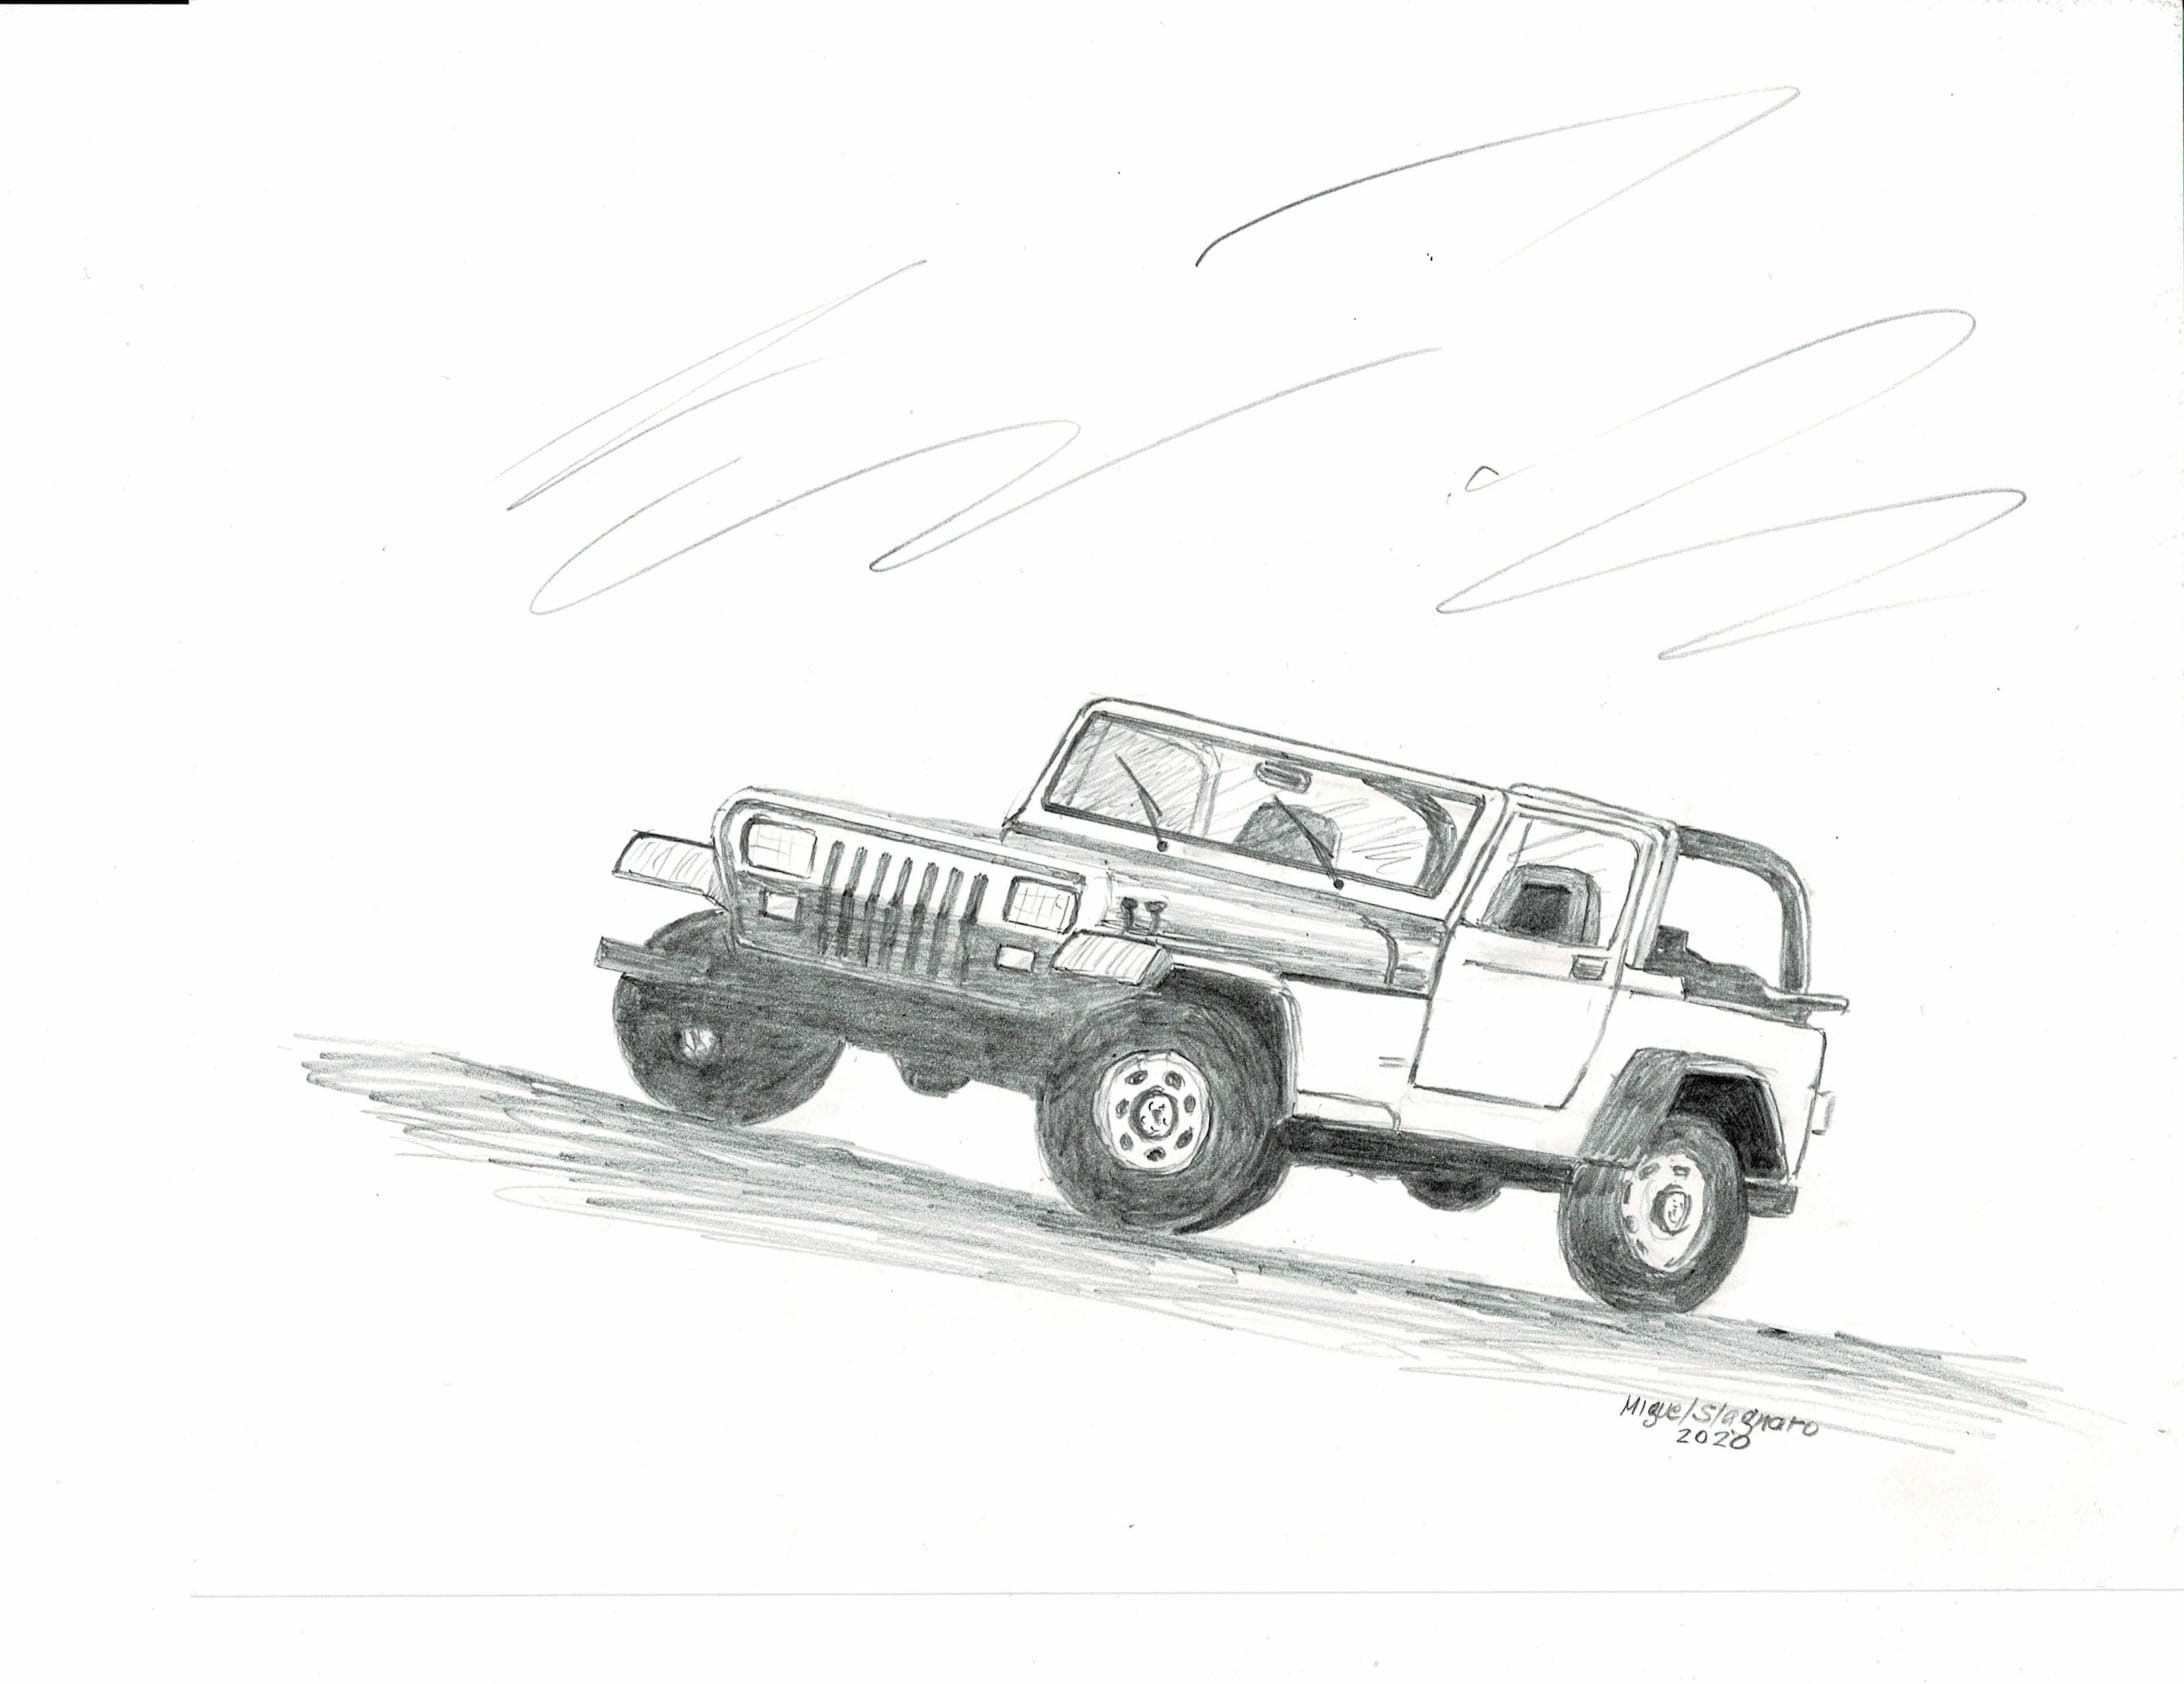 How to draw JEEP WRANGLER Rubicon 2017 easy / drawing Mahindra Thar off road  car step by step - YouTube